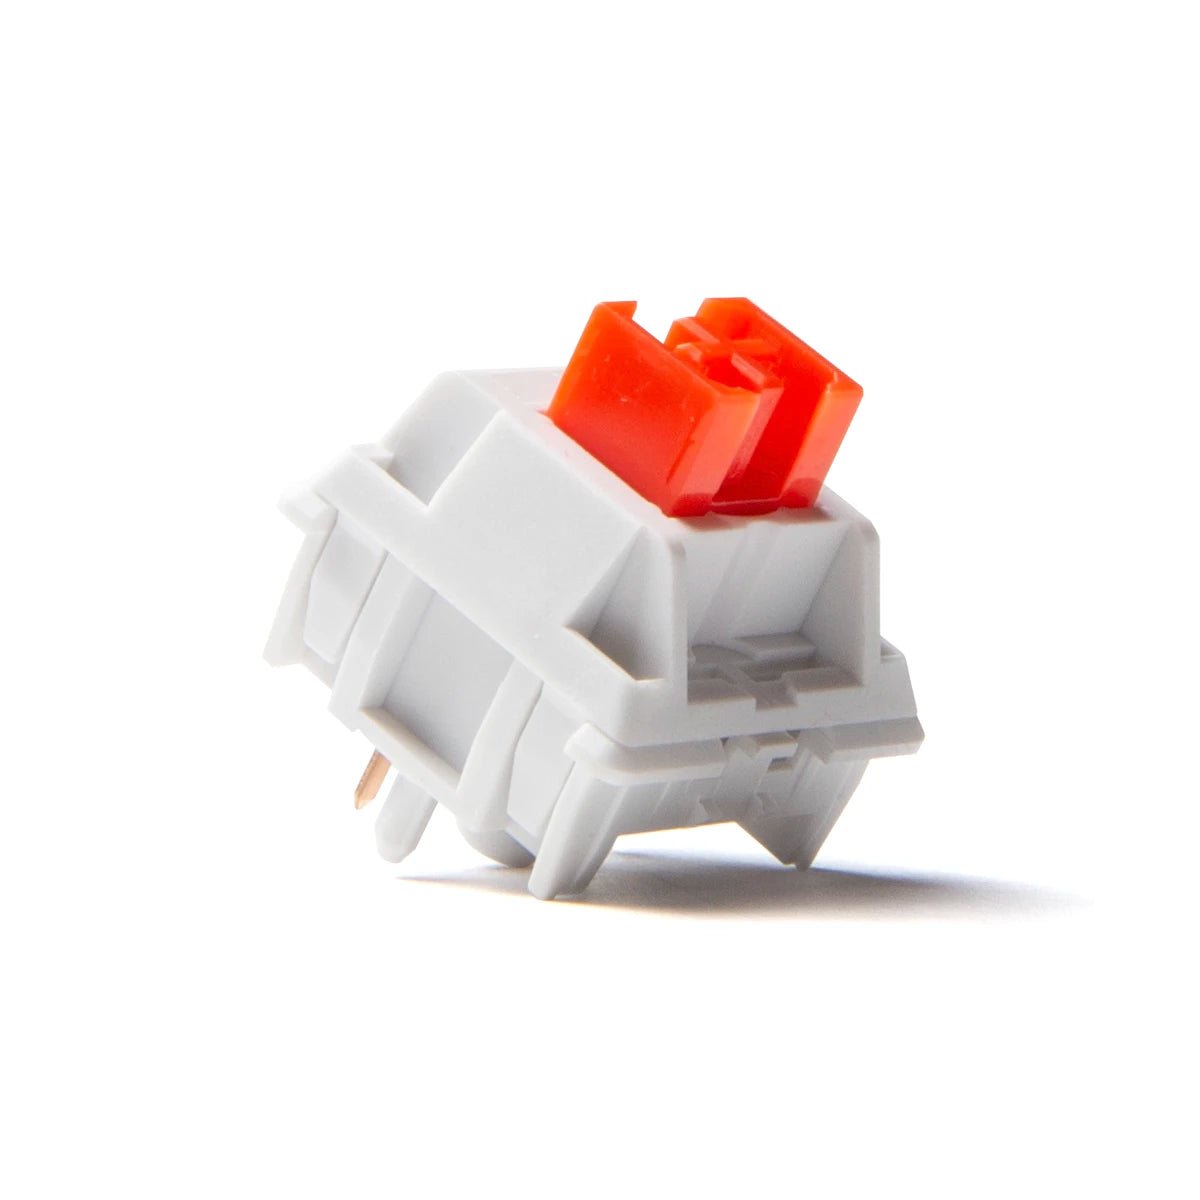 Wuque WS Red Linear Switches 5PIN x10